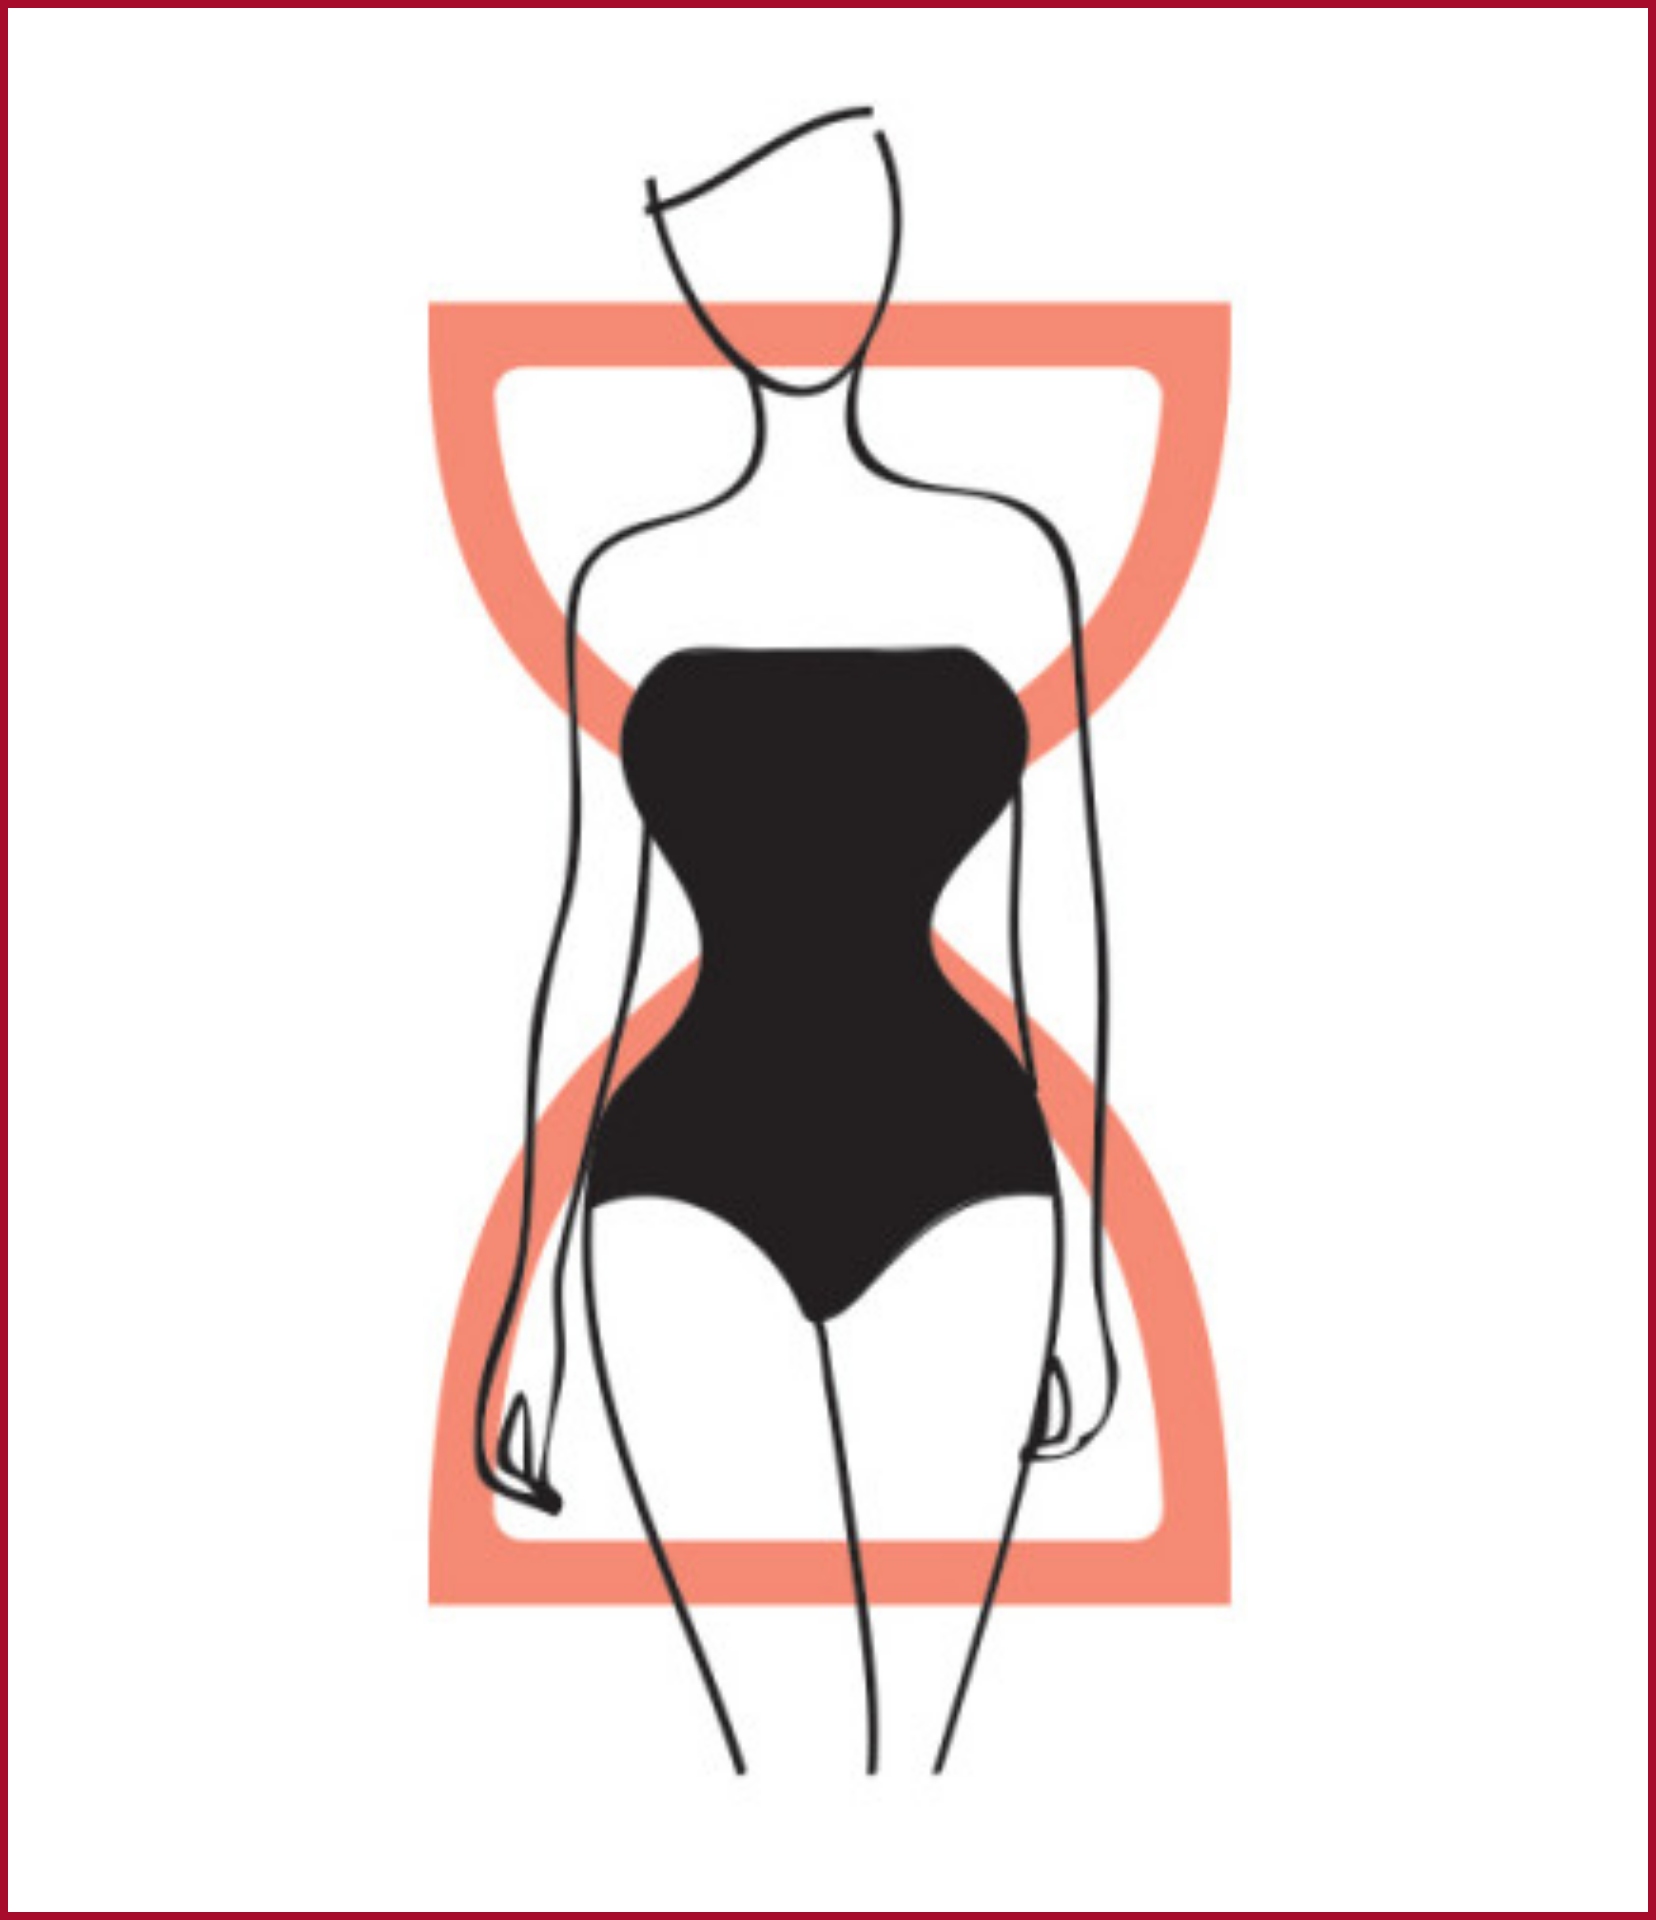 Did you know there are 12 different body shapes a woman can have